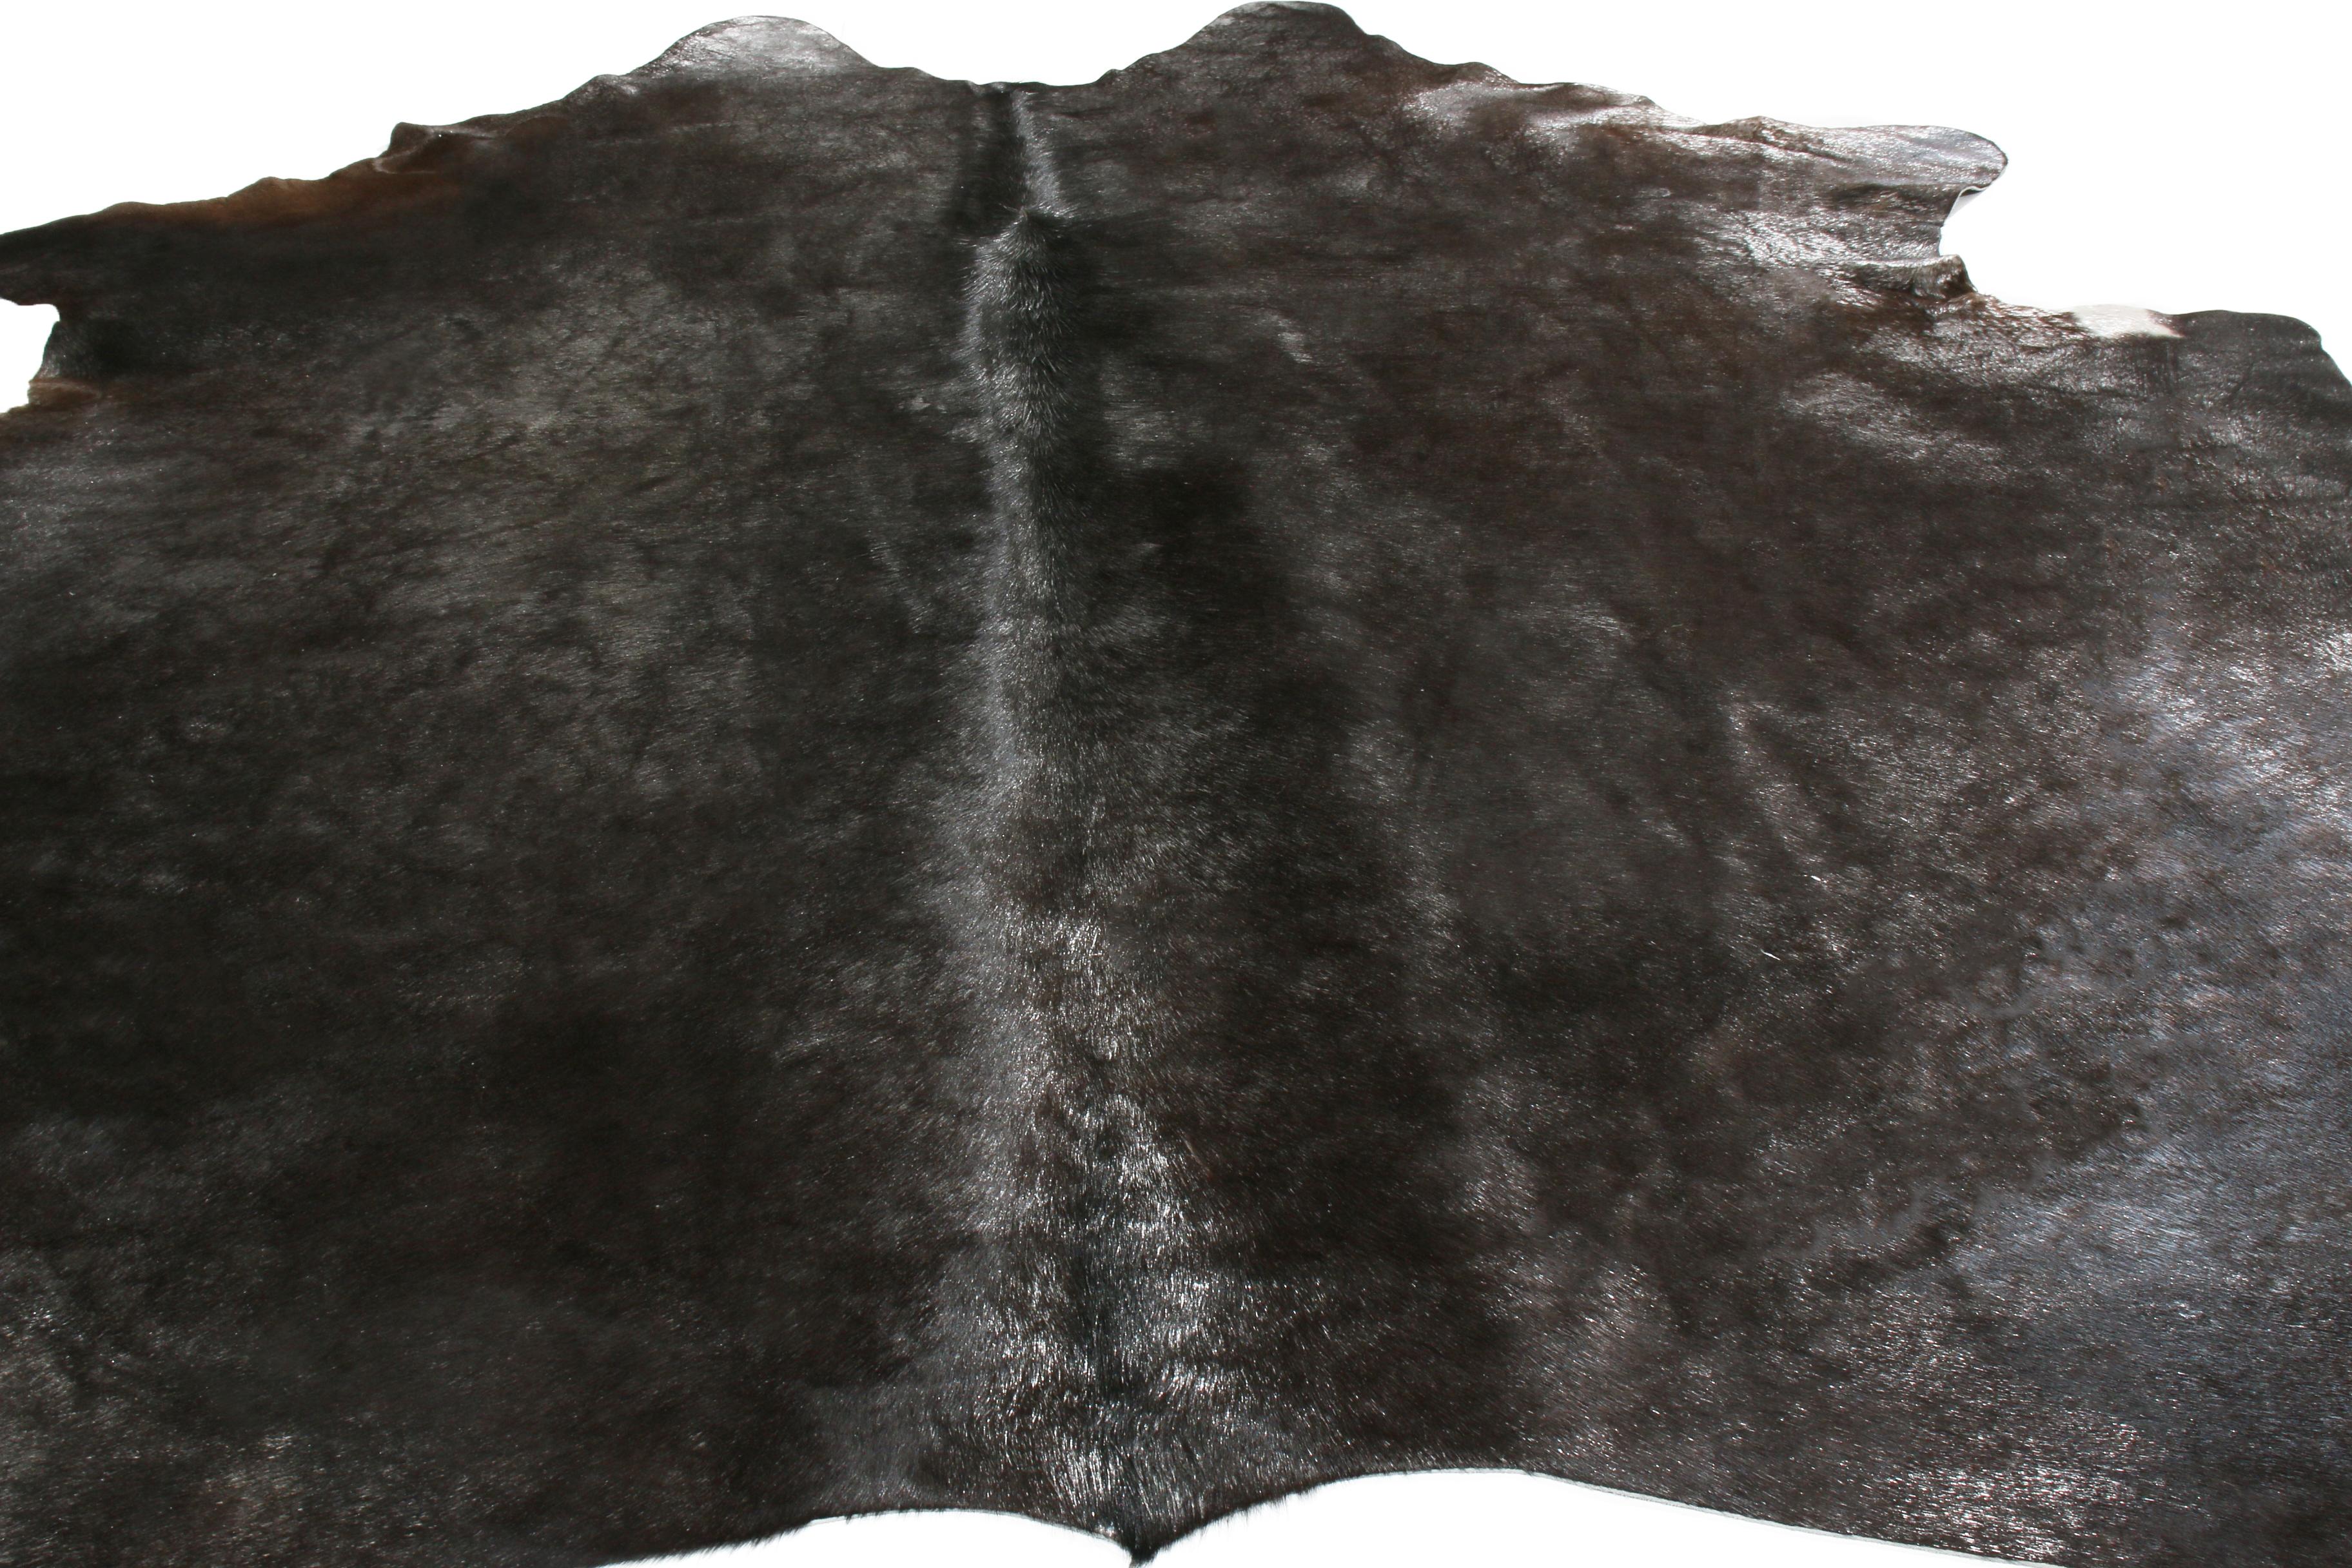 Originating from the United States, this contemporary leather cowhide rug has a natural abrash of gray and black color with white background accents to its hide, a distinguished choice for more luxurious spaces. This tannery maintained the original